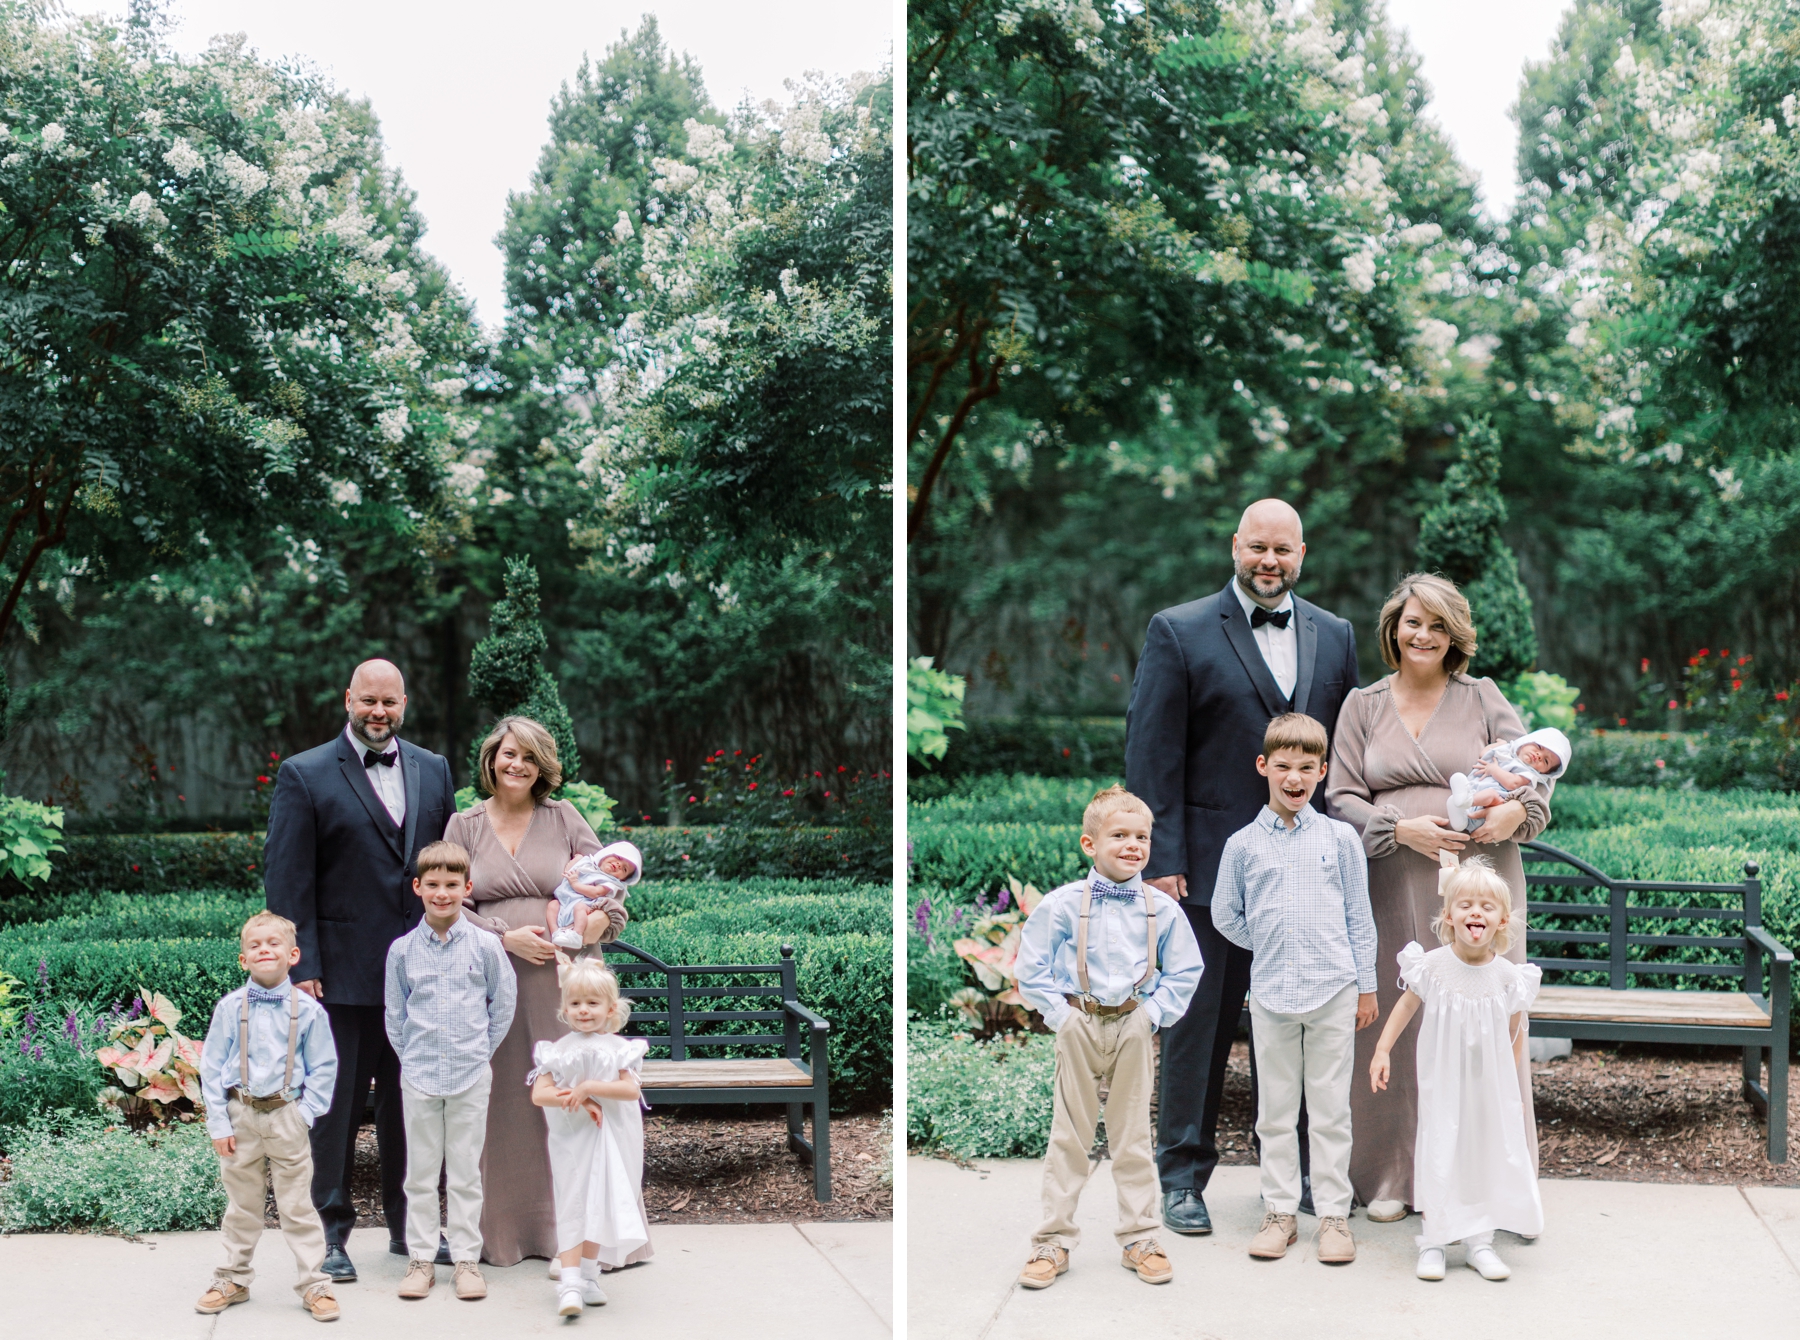 Anna Swanson and her family - Savannah Wedding Planners